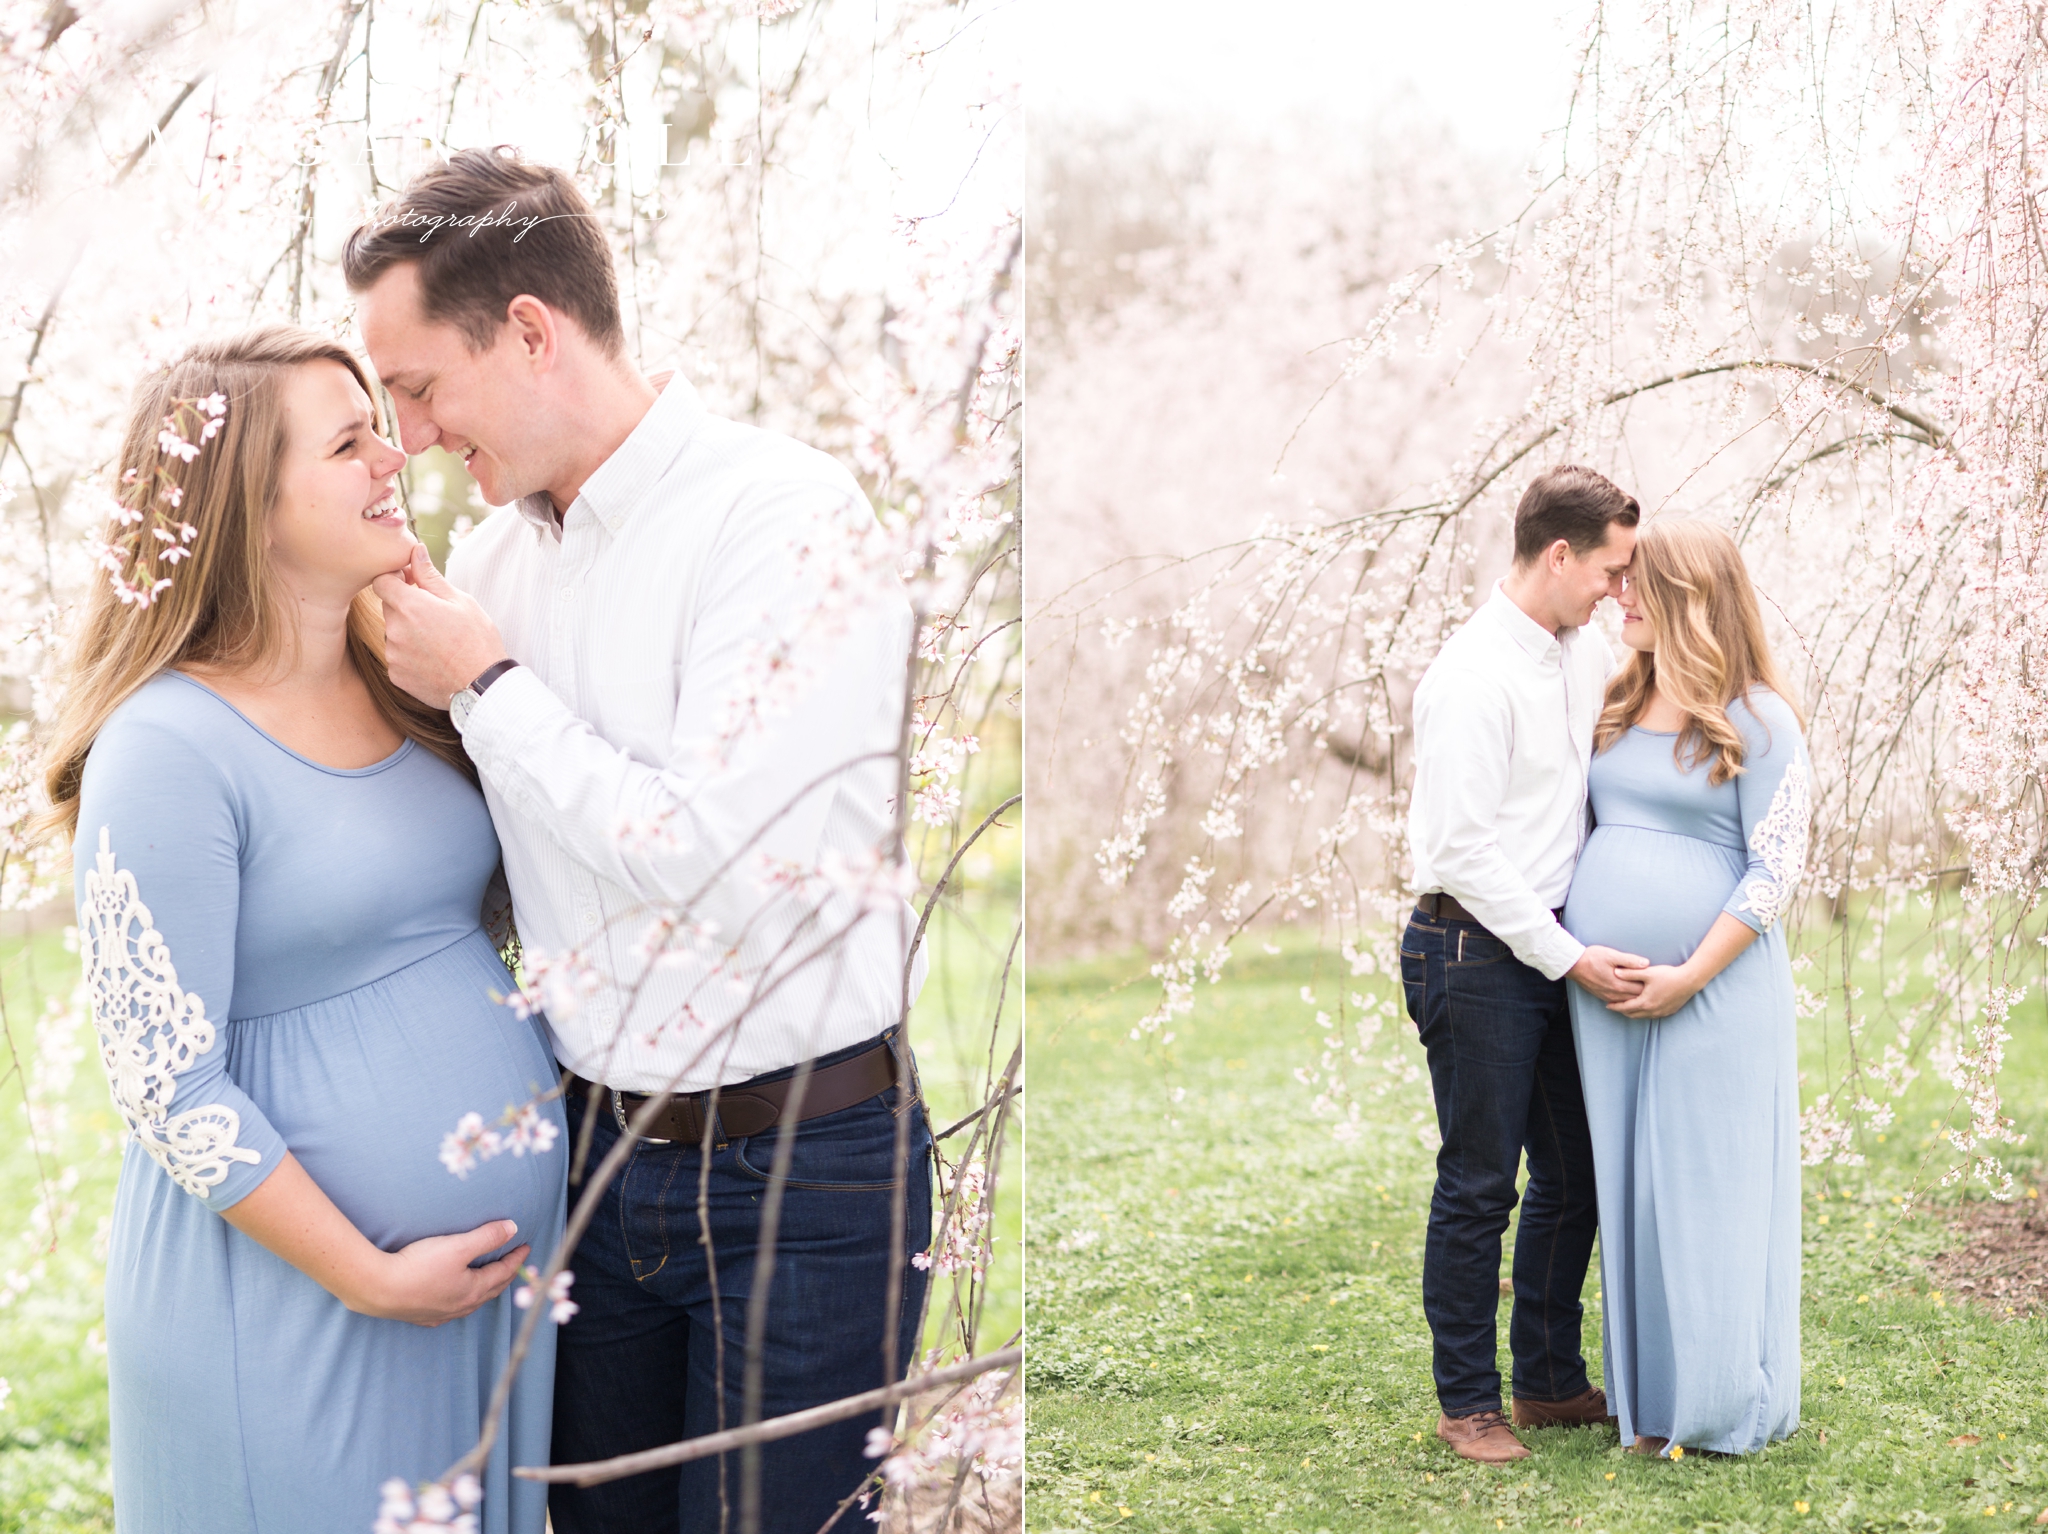 Blue Maternity Dress, Maternity Picture Outfits